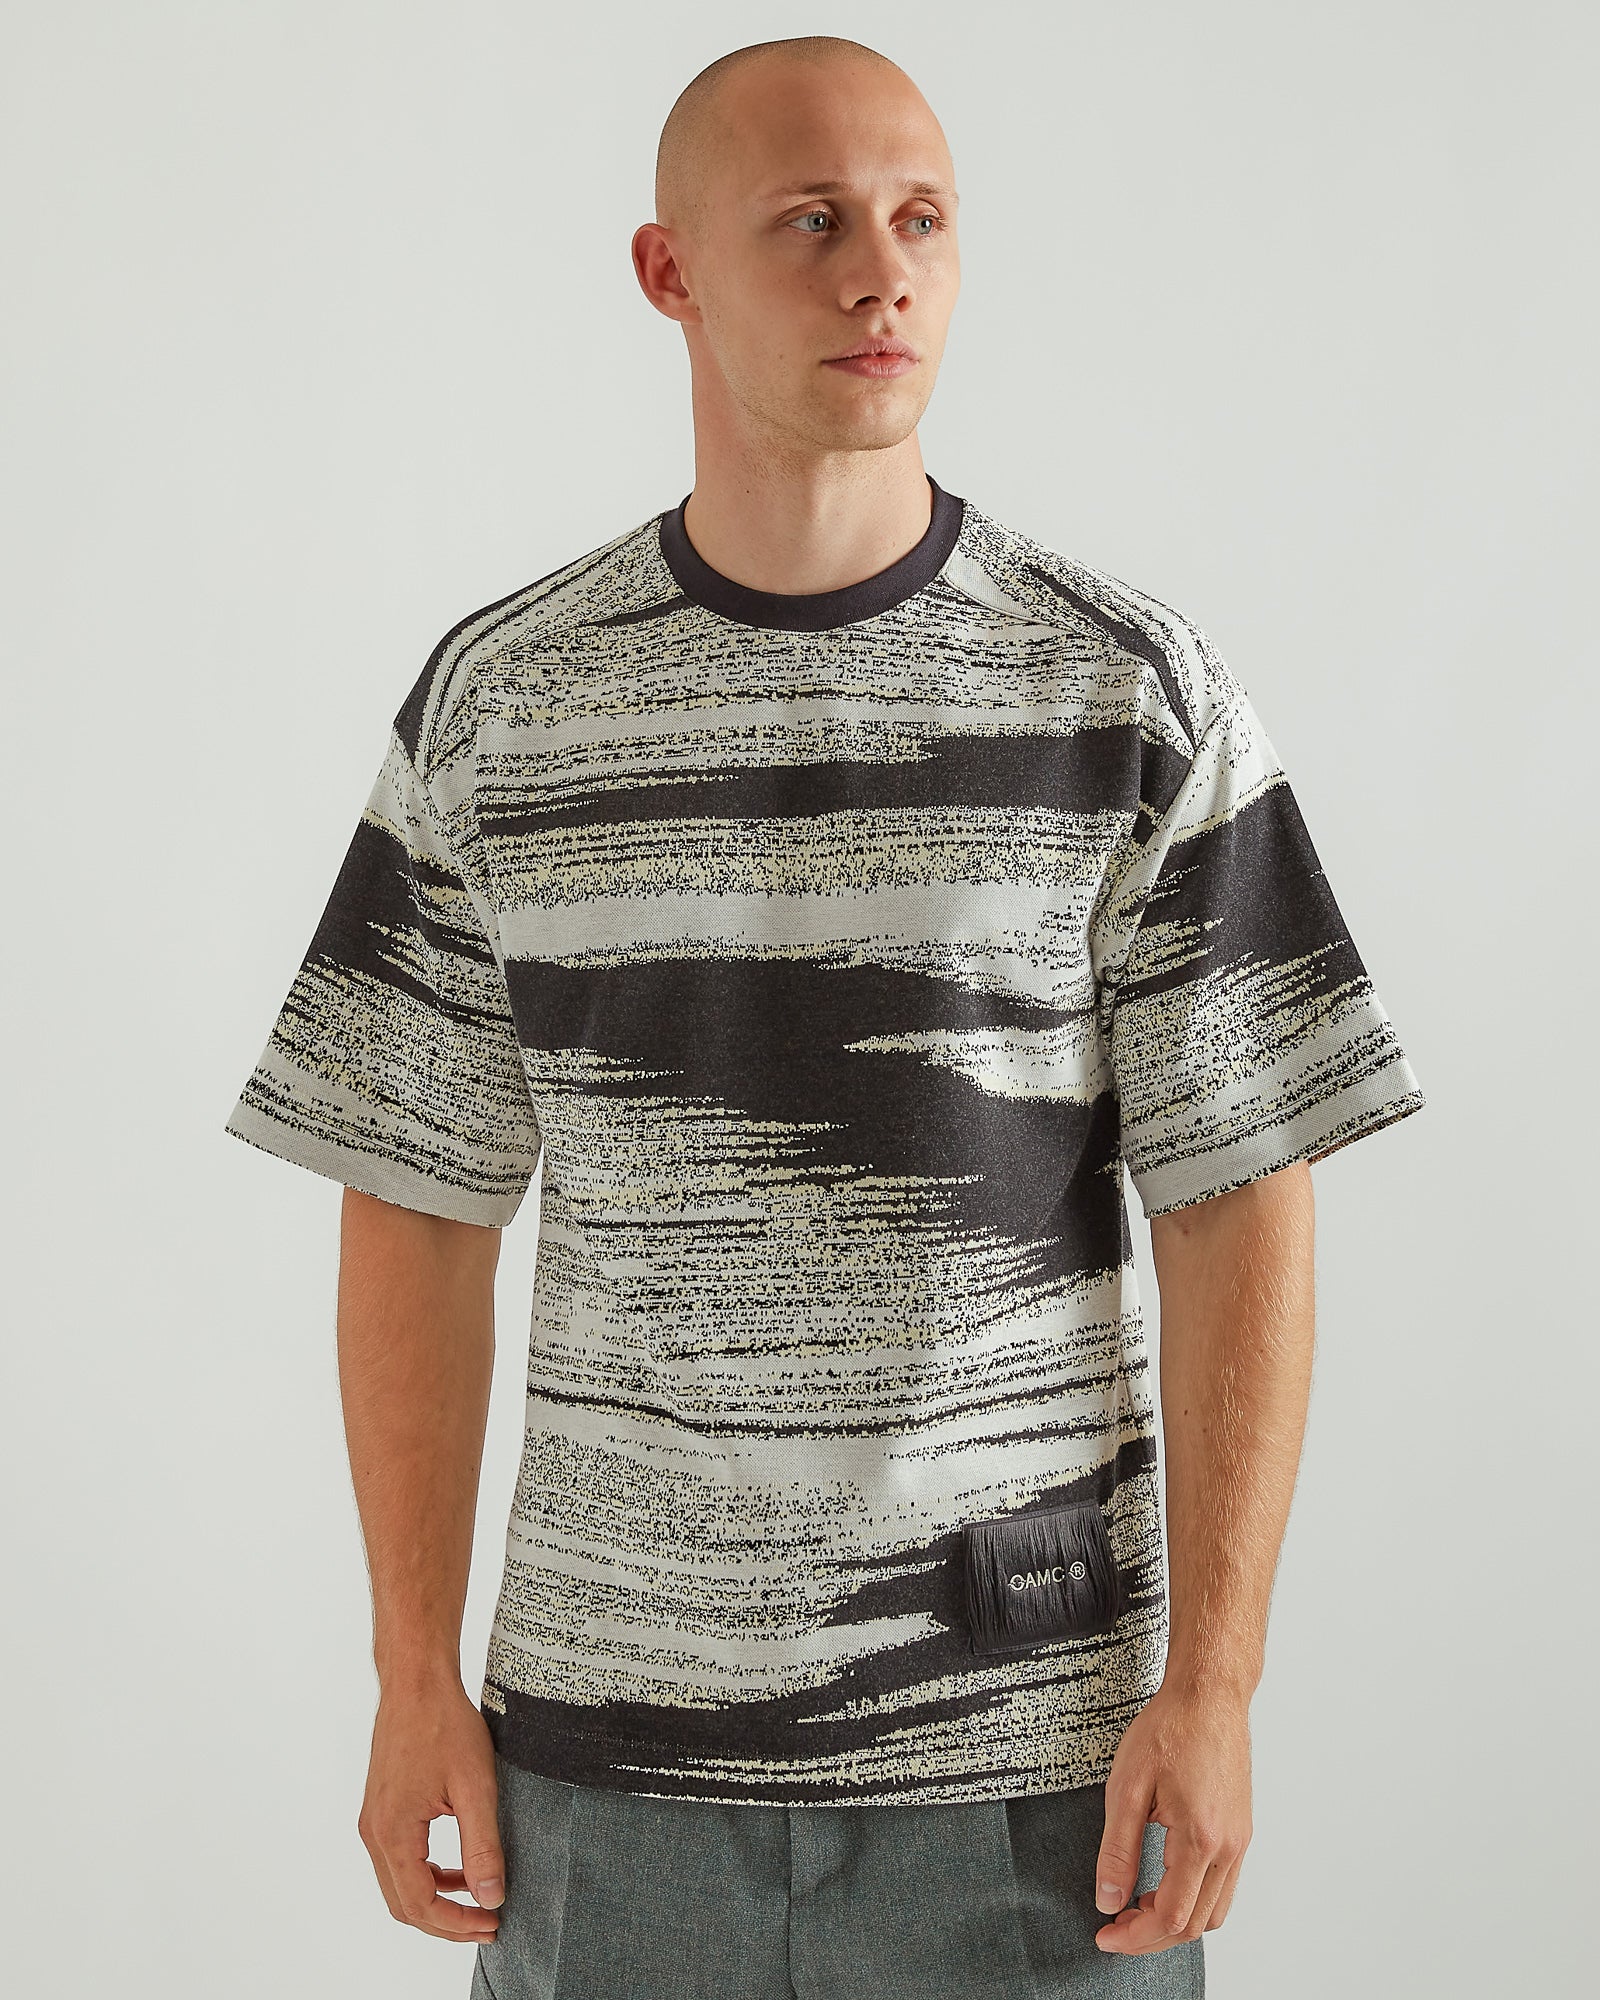 Noise S/S T-Shirt in Off White